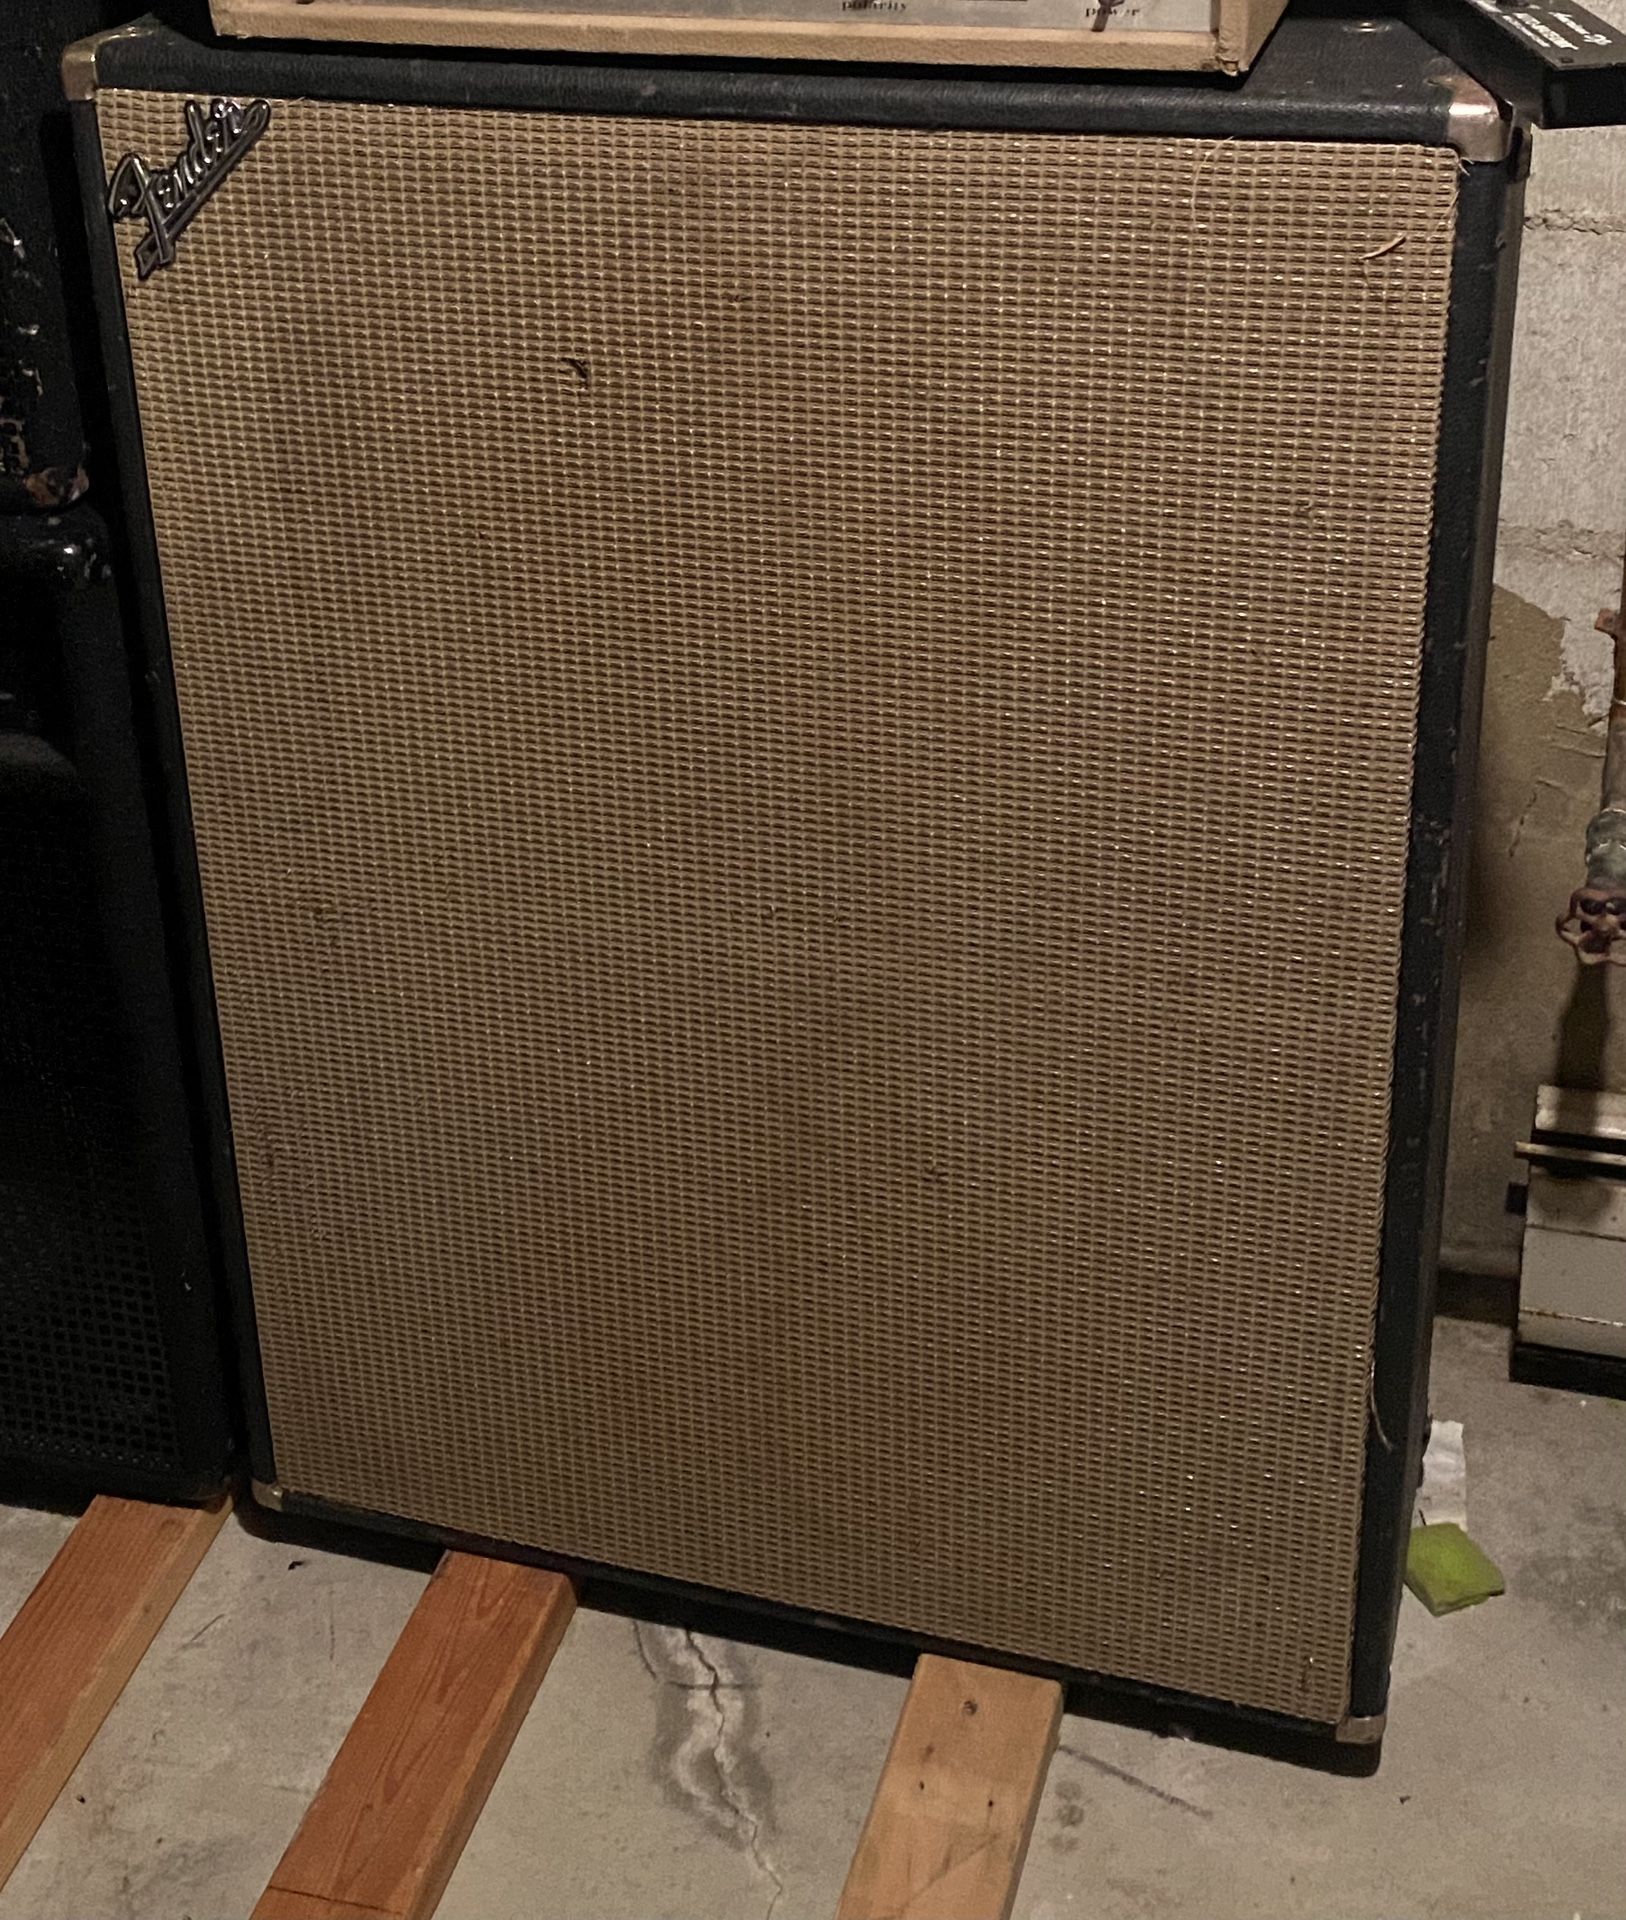 1960’s- Early 70’s Fender 2-12 Cabinet No Speakers